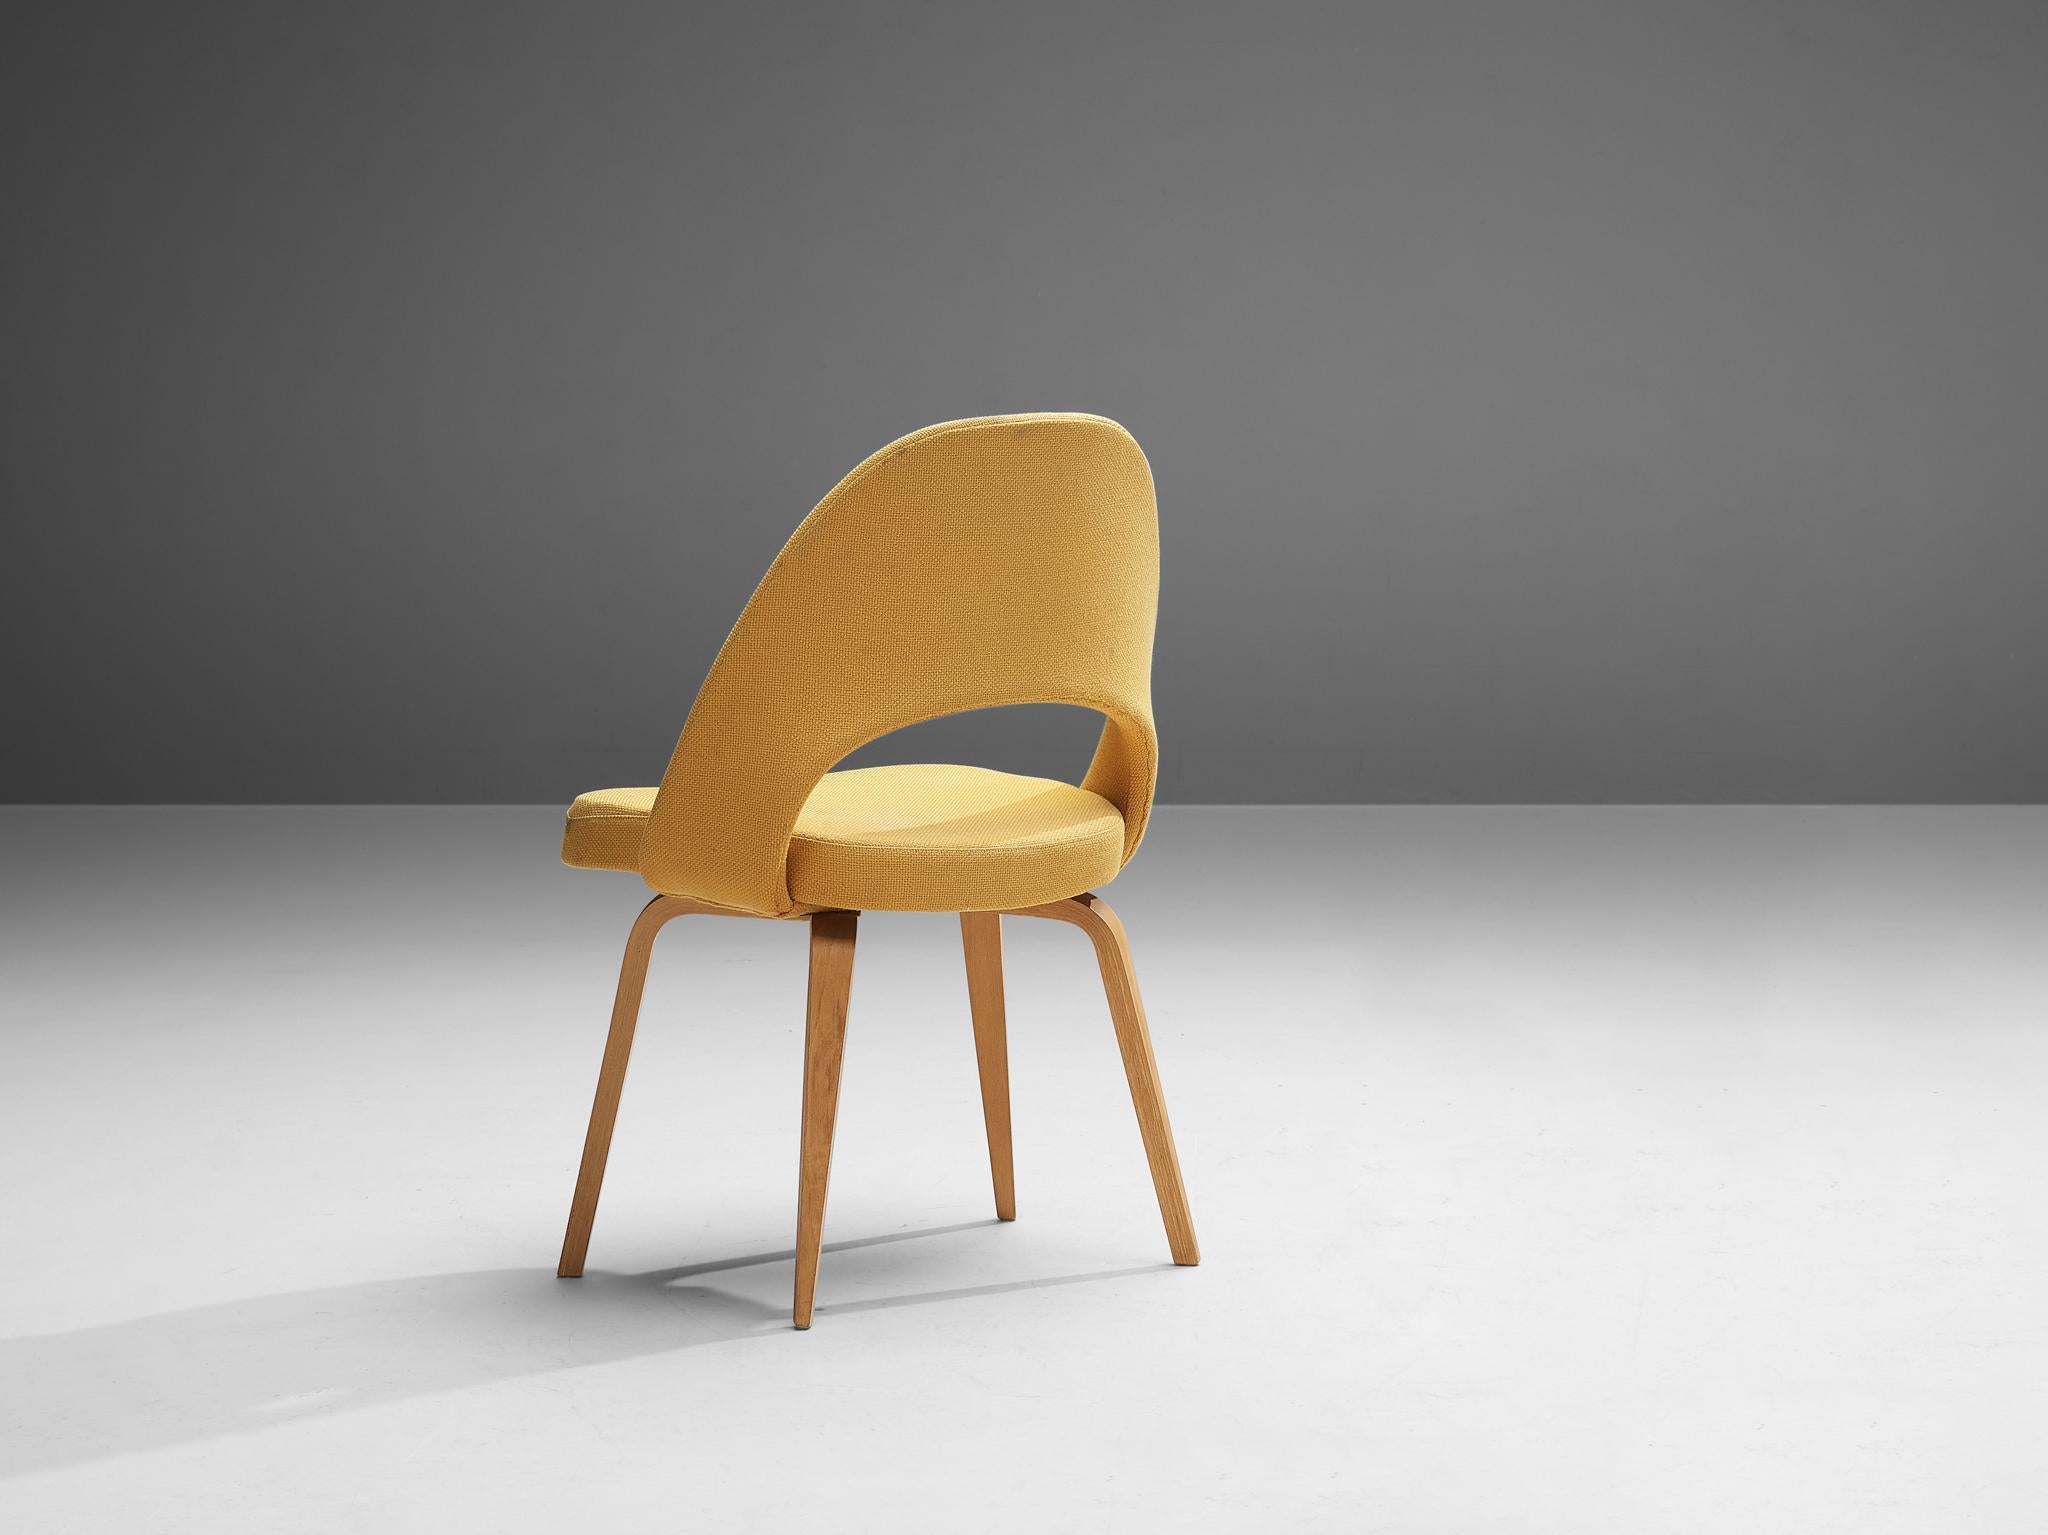 Eero Saarinen for Knoll International, dining chair model 72, plywood, fabric, United States, design 1948, later production

An organic shaped chair designed by Eero Saarinen. A fluid, sculptural form. This timeless and versatile design continues to